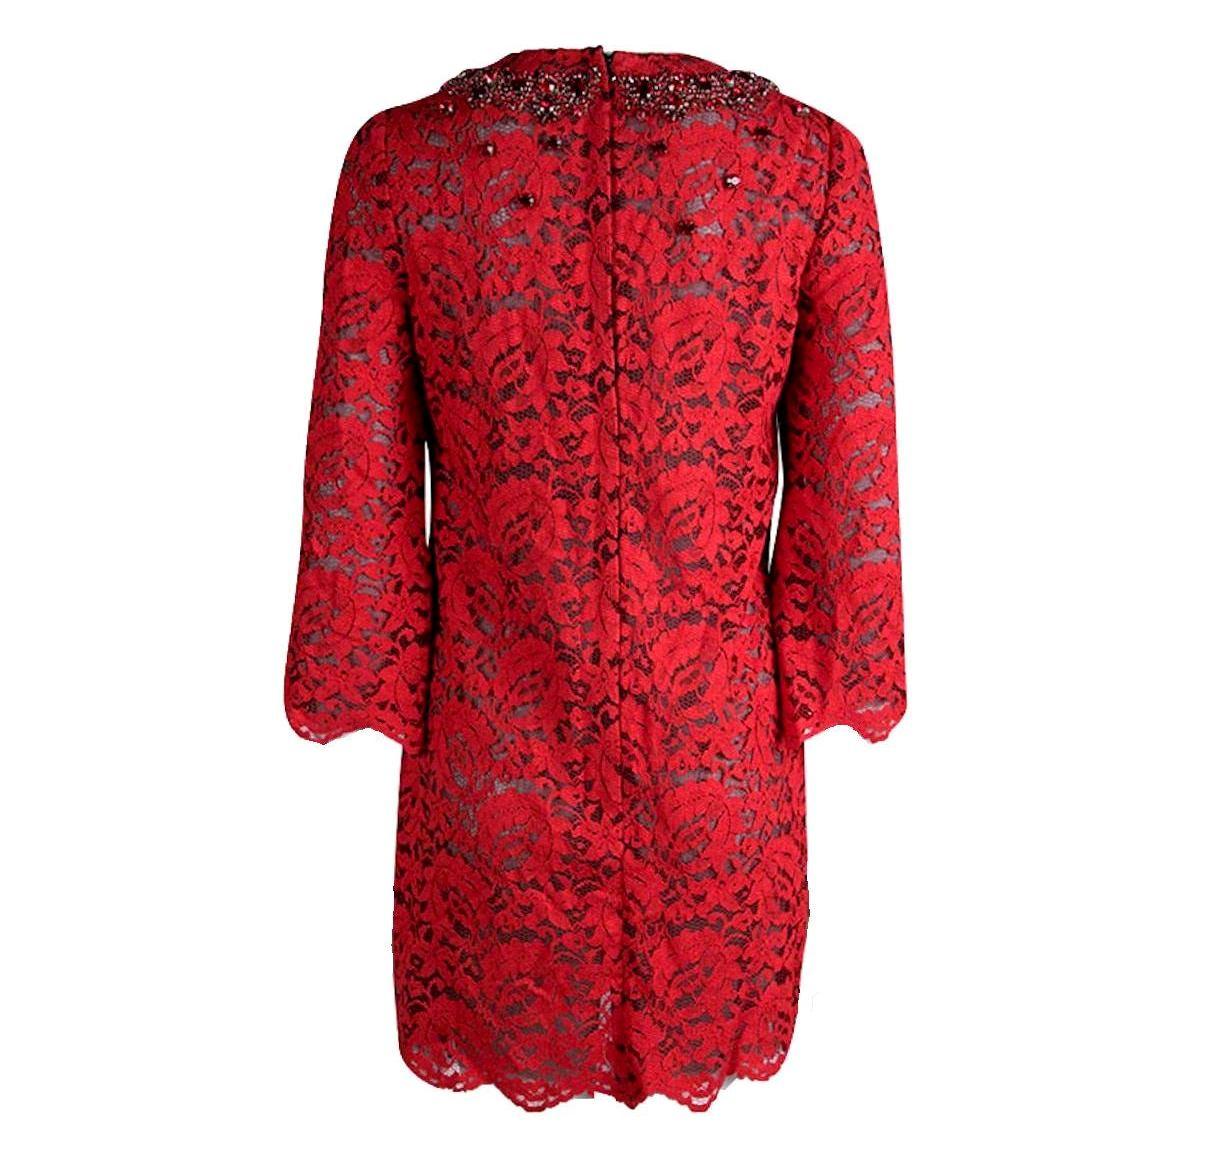 
Beautifully cut from rich cardinal-red lace, Dolce & Gabbana hit a retro-inspired note with this thigh-grazing mini dress. A sprinkling of ruby crystals at the neckline catch the light, giving this elegant piece a dose of the label's glamorous